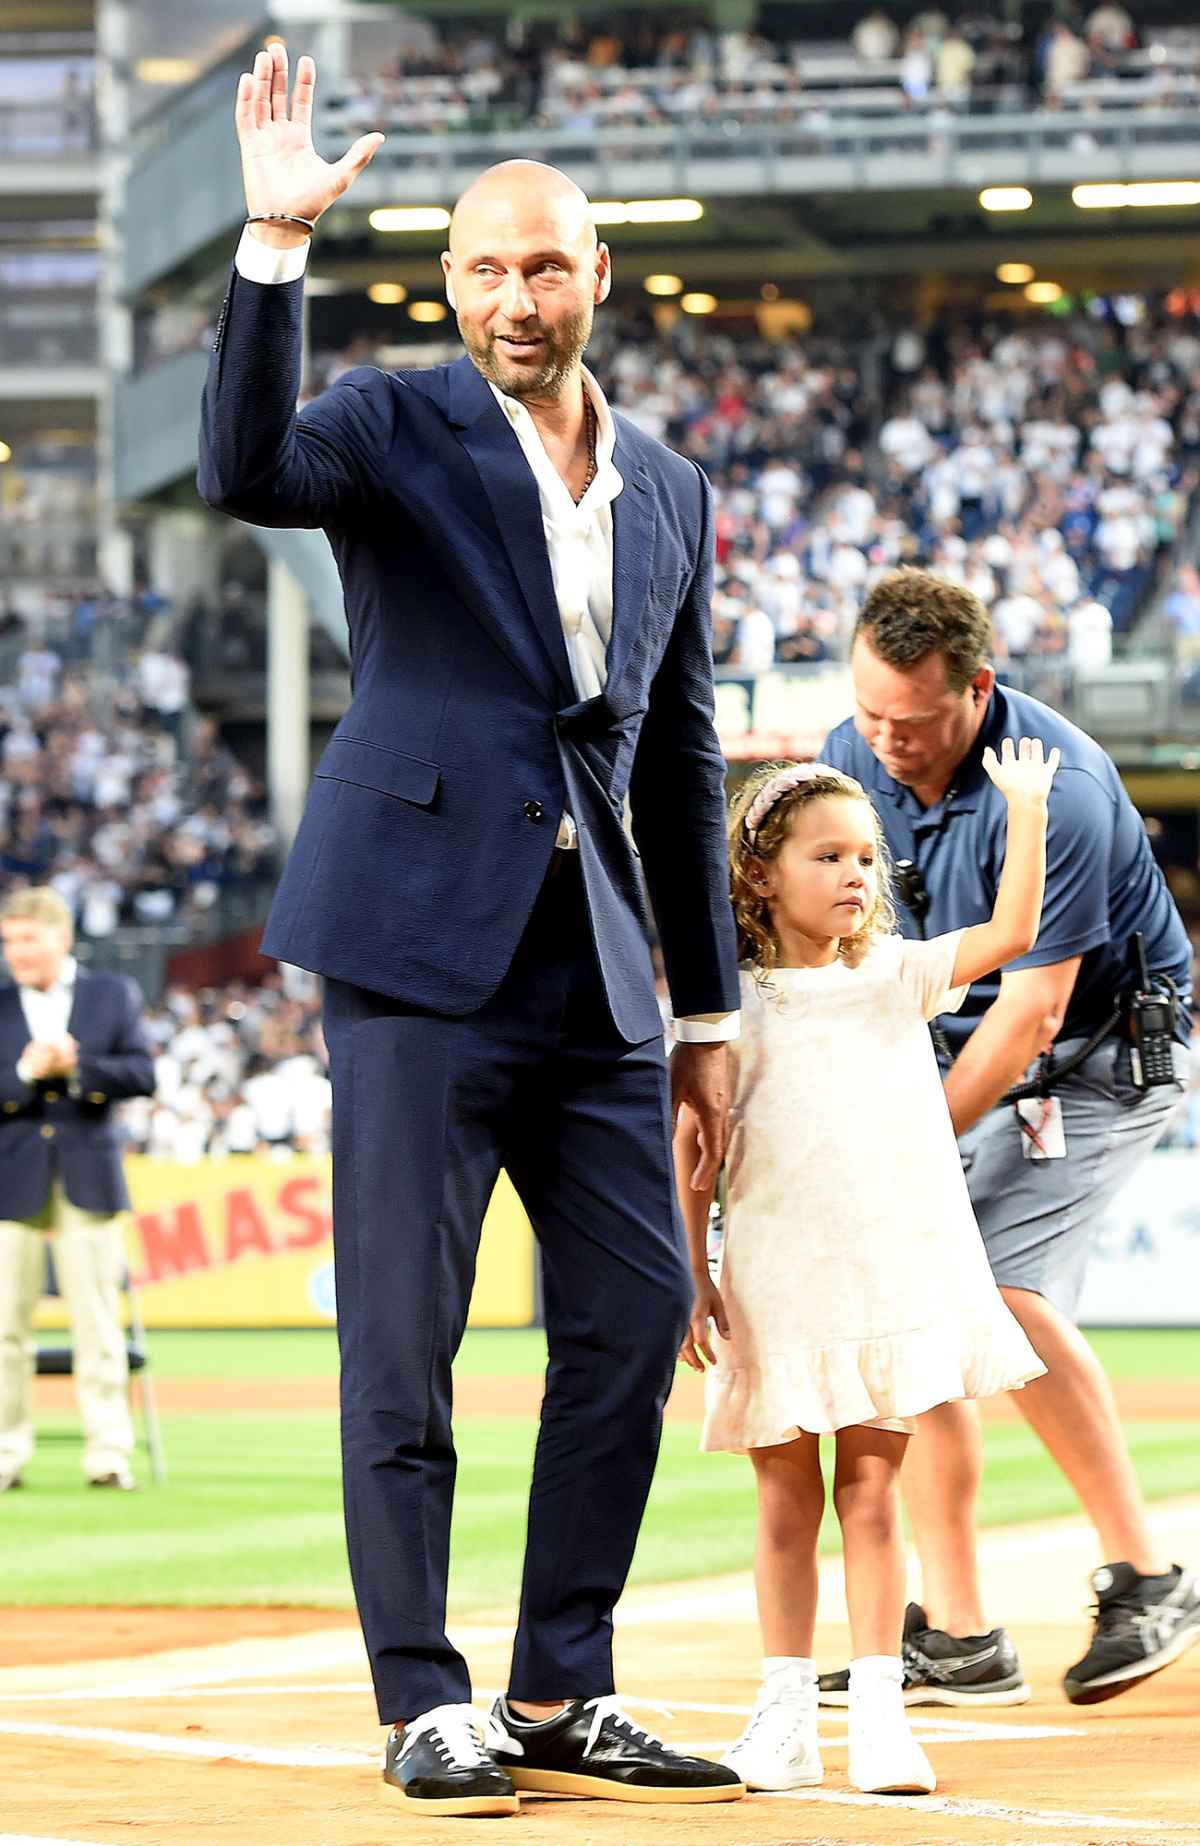 Derek Jeter's 2 Kids Attend Hall Of Fame Induction With Hannah